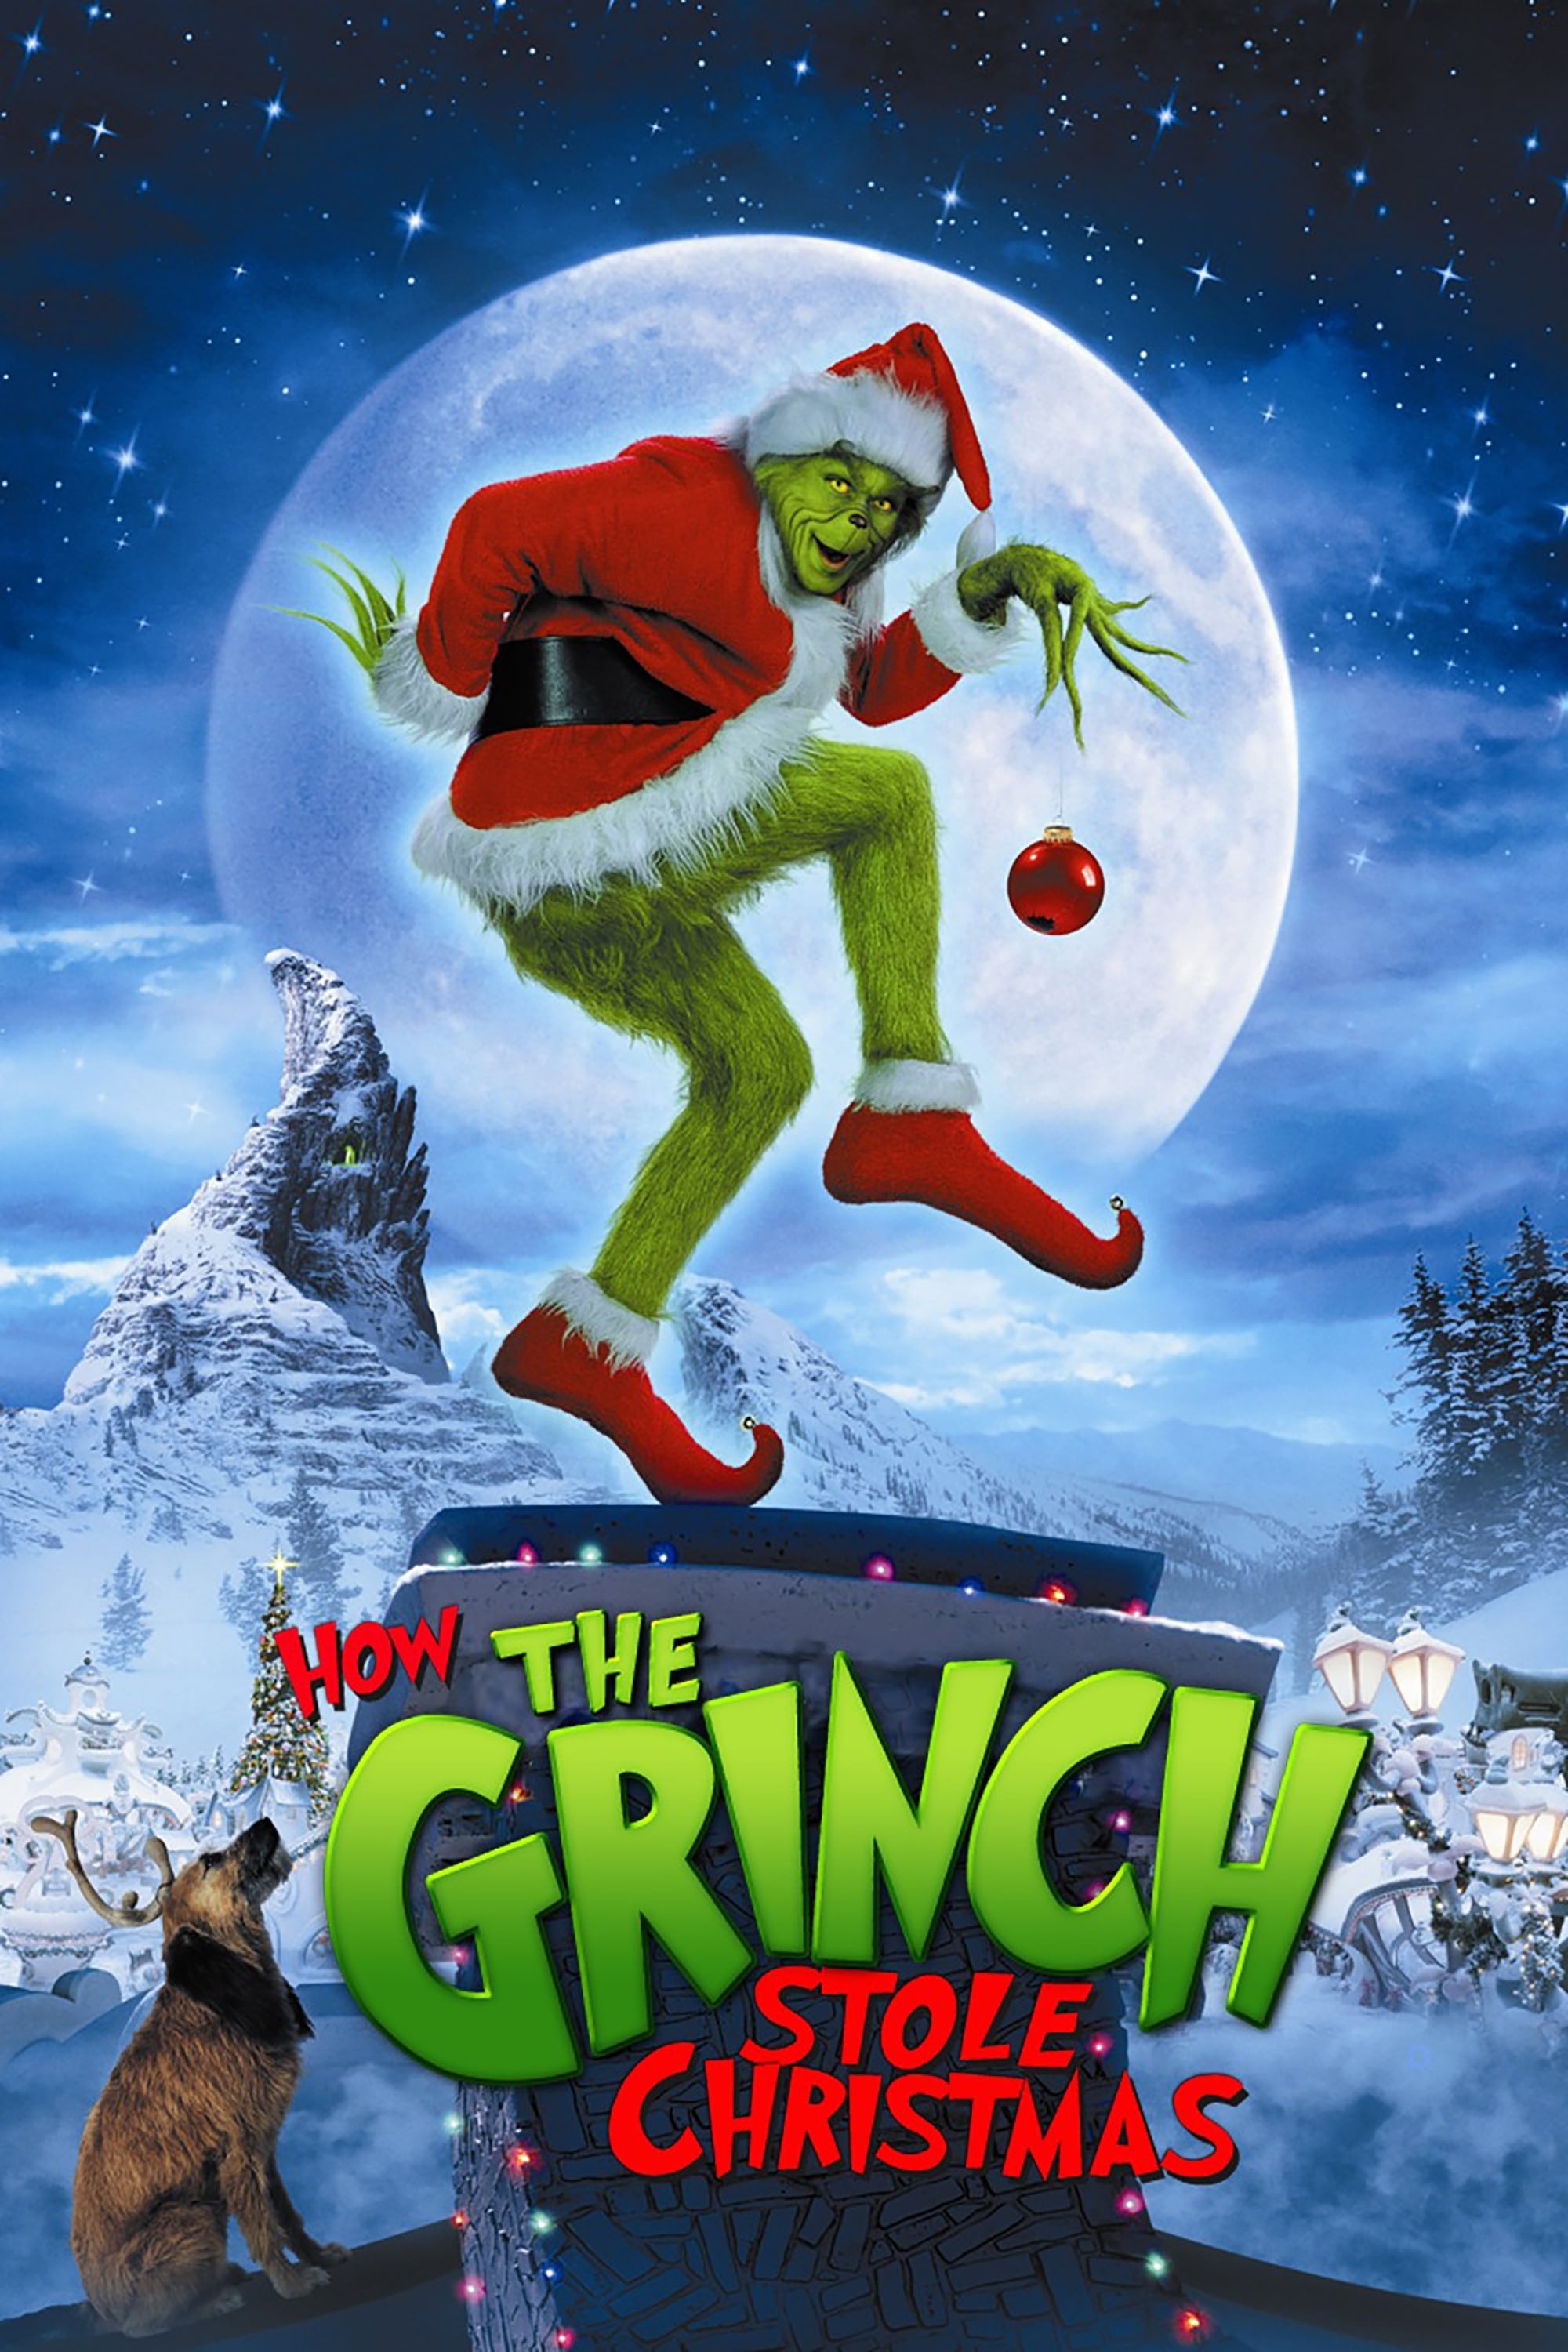 How the Grinch Stole Christmas 2000 Movie.